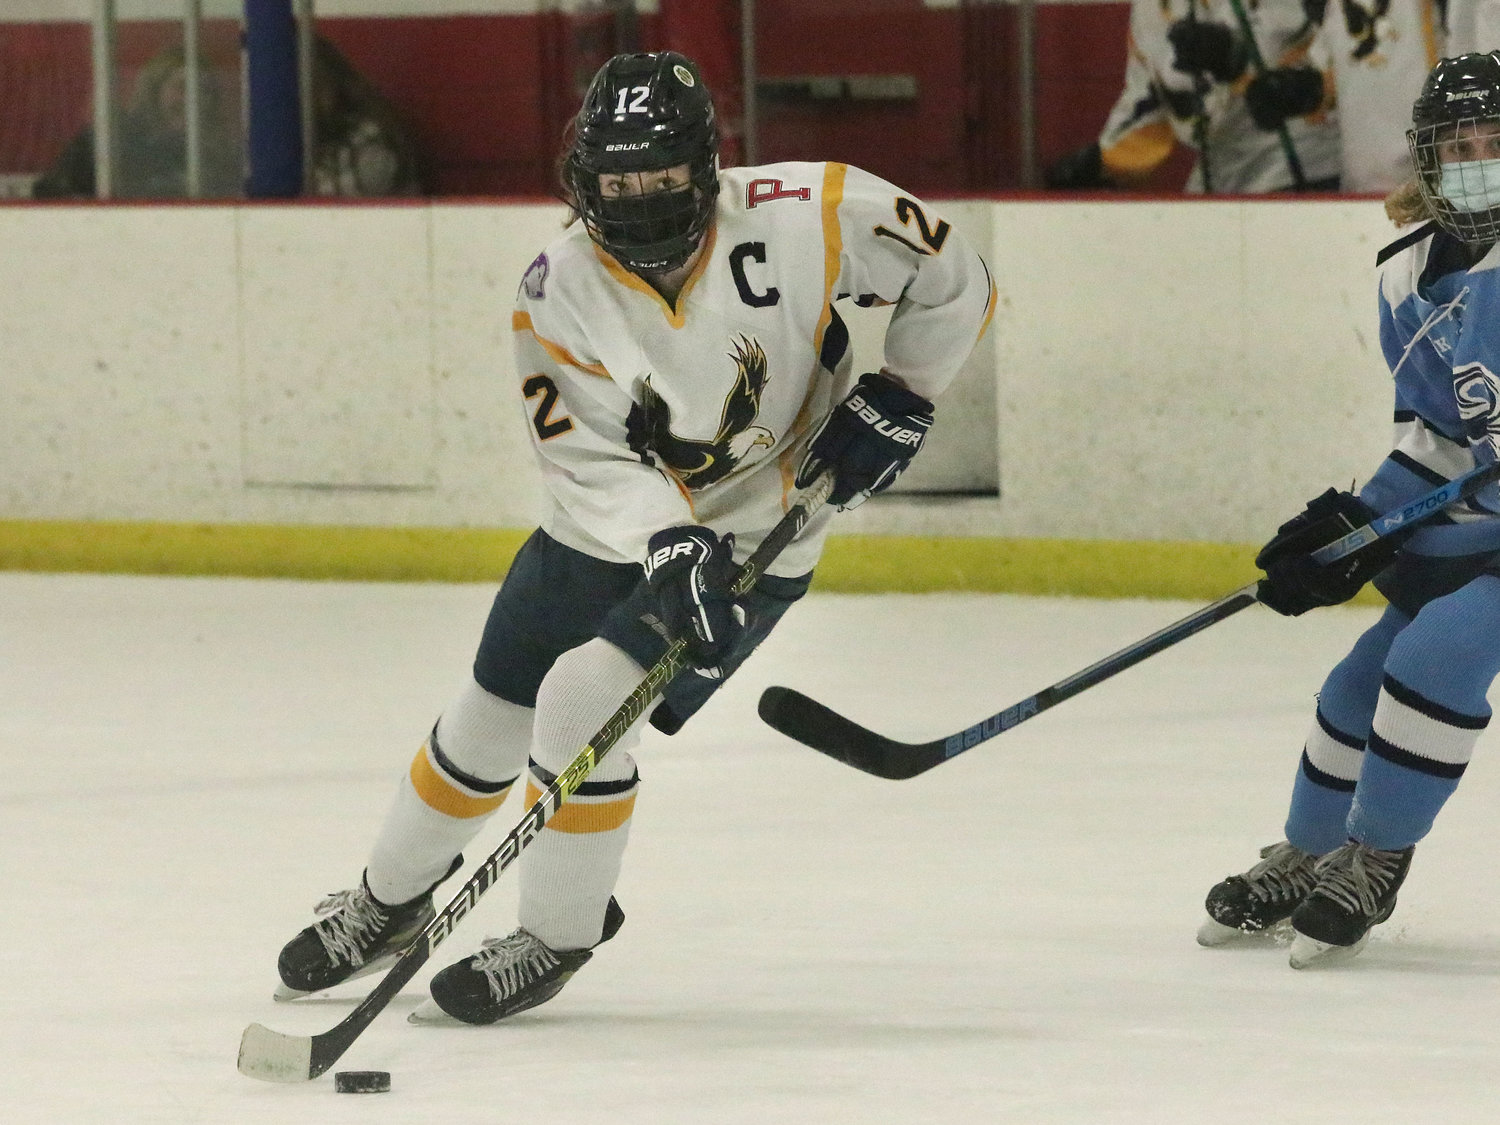 Kat Barker skates with the puck, into the Narragansett zone in Game 2.